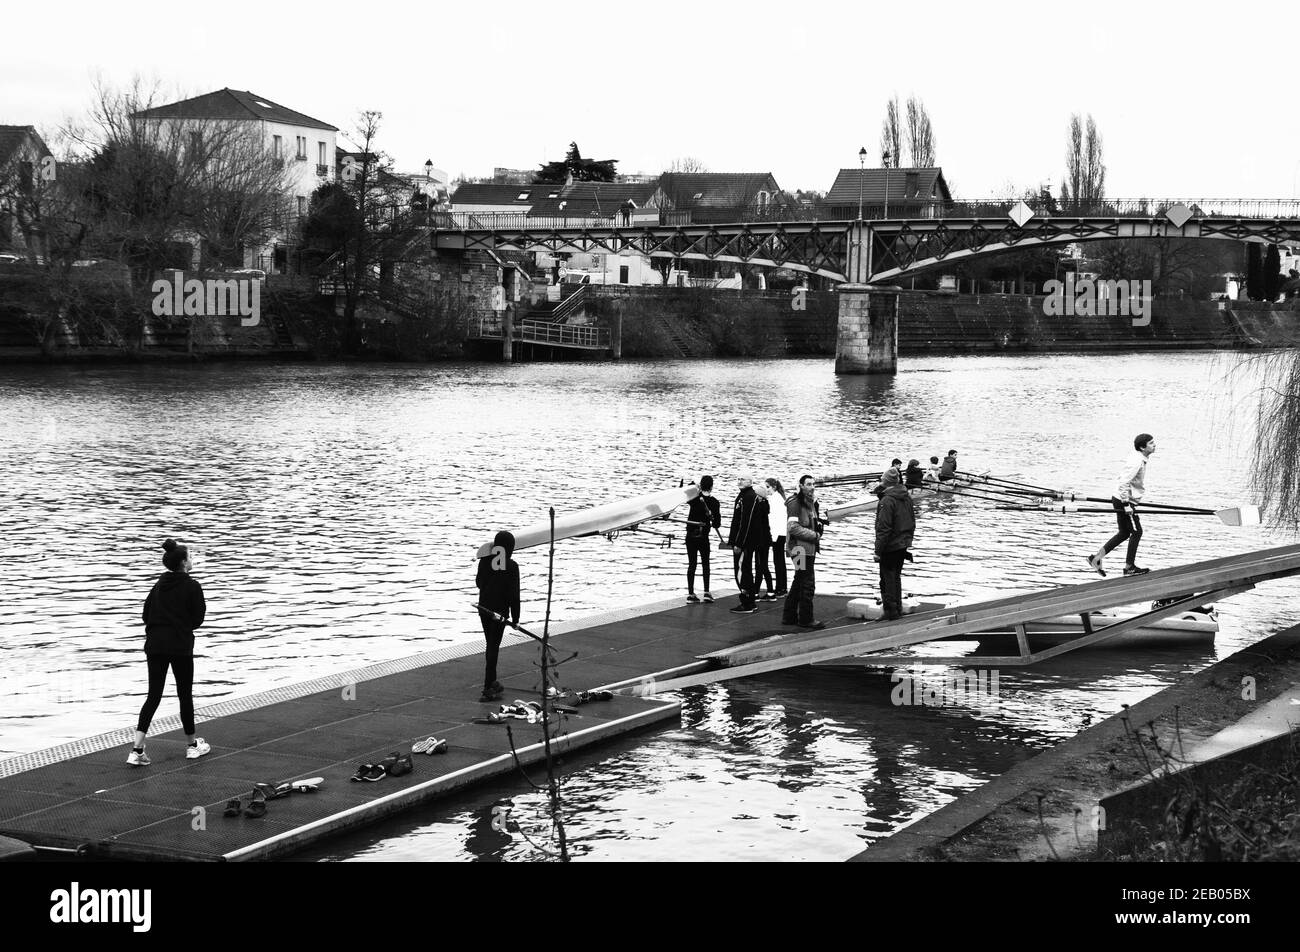 ILE-DE-FRANCE, FRANCE - JANUARY 26, 2019: Junior rowers training at Marne river. Boys carrying and getting the boat in the water. Black white photo. Stock Photo